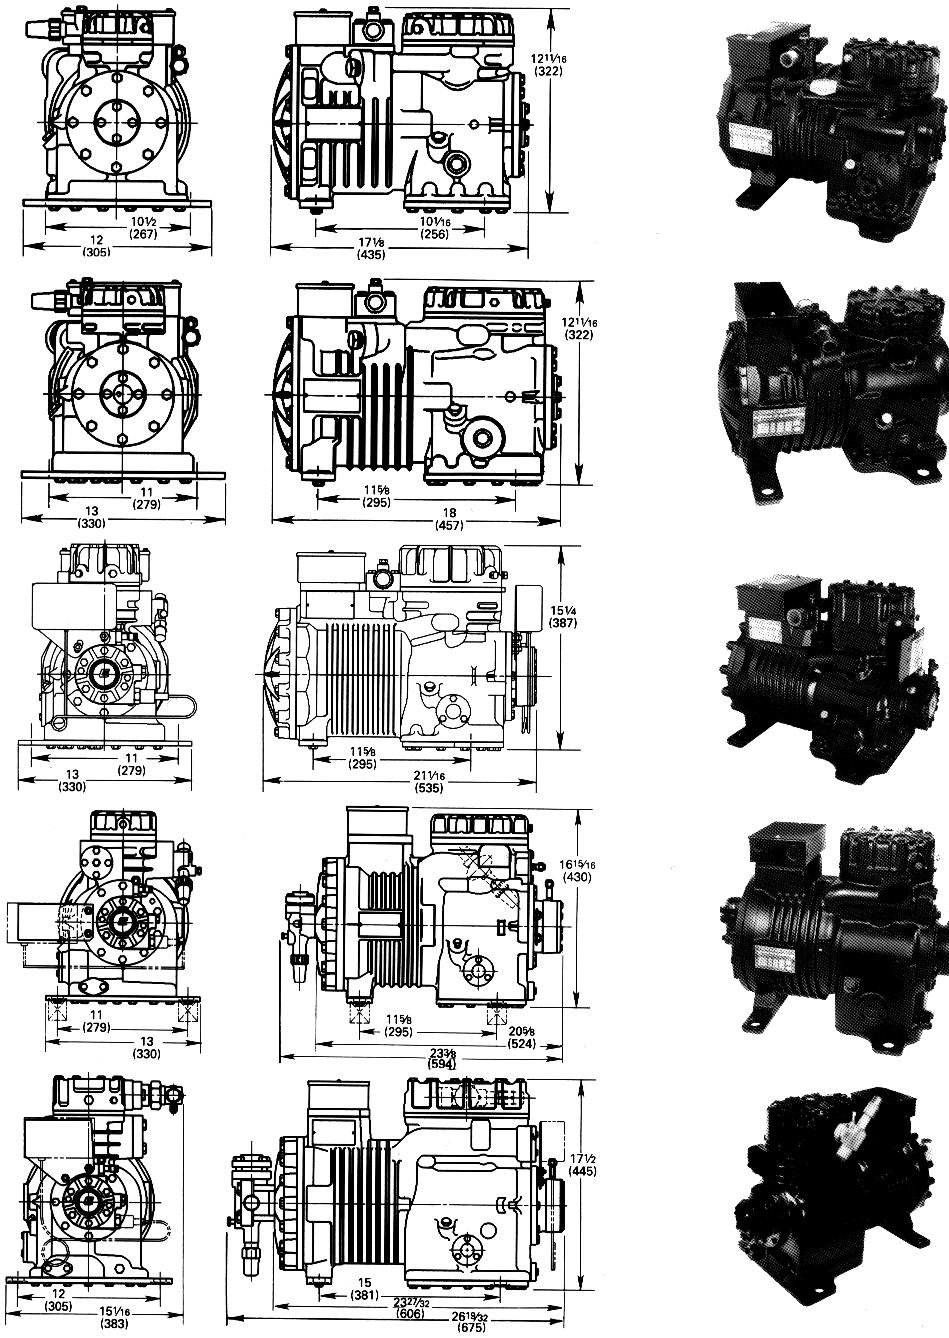 CONVENTIONAL COMPRESSORS DIMENSIONS AND PHOTOGRAPHS ER F A M I L Y Model ERF1-0310 Shown 3R F A M I L Y Model 3RA1-0310 Shown NR F A M I L Y